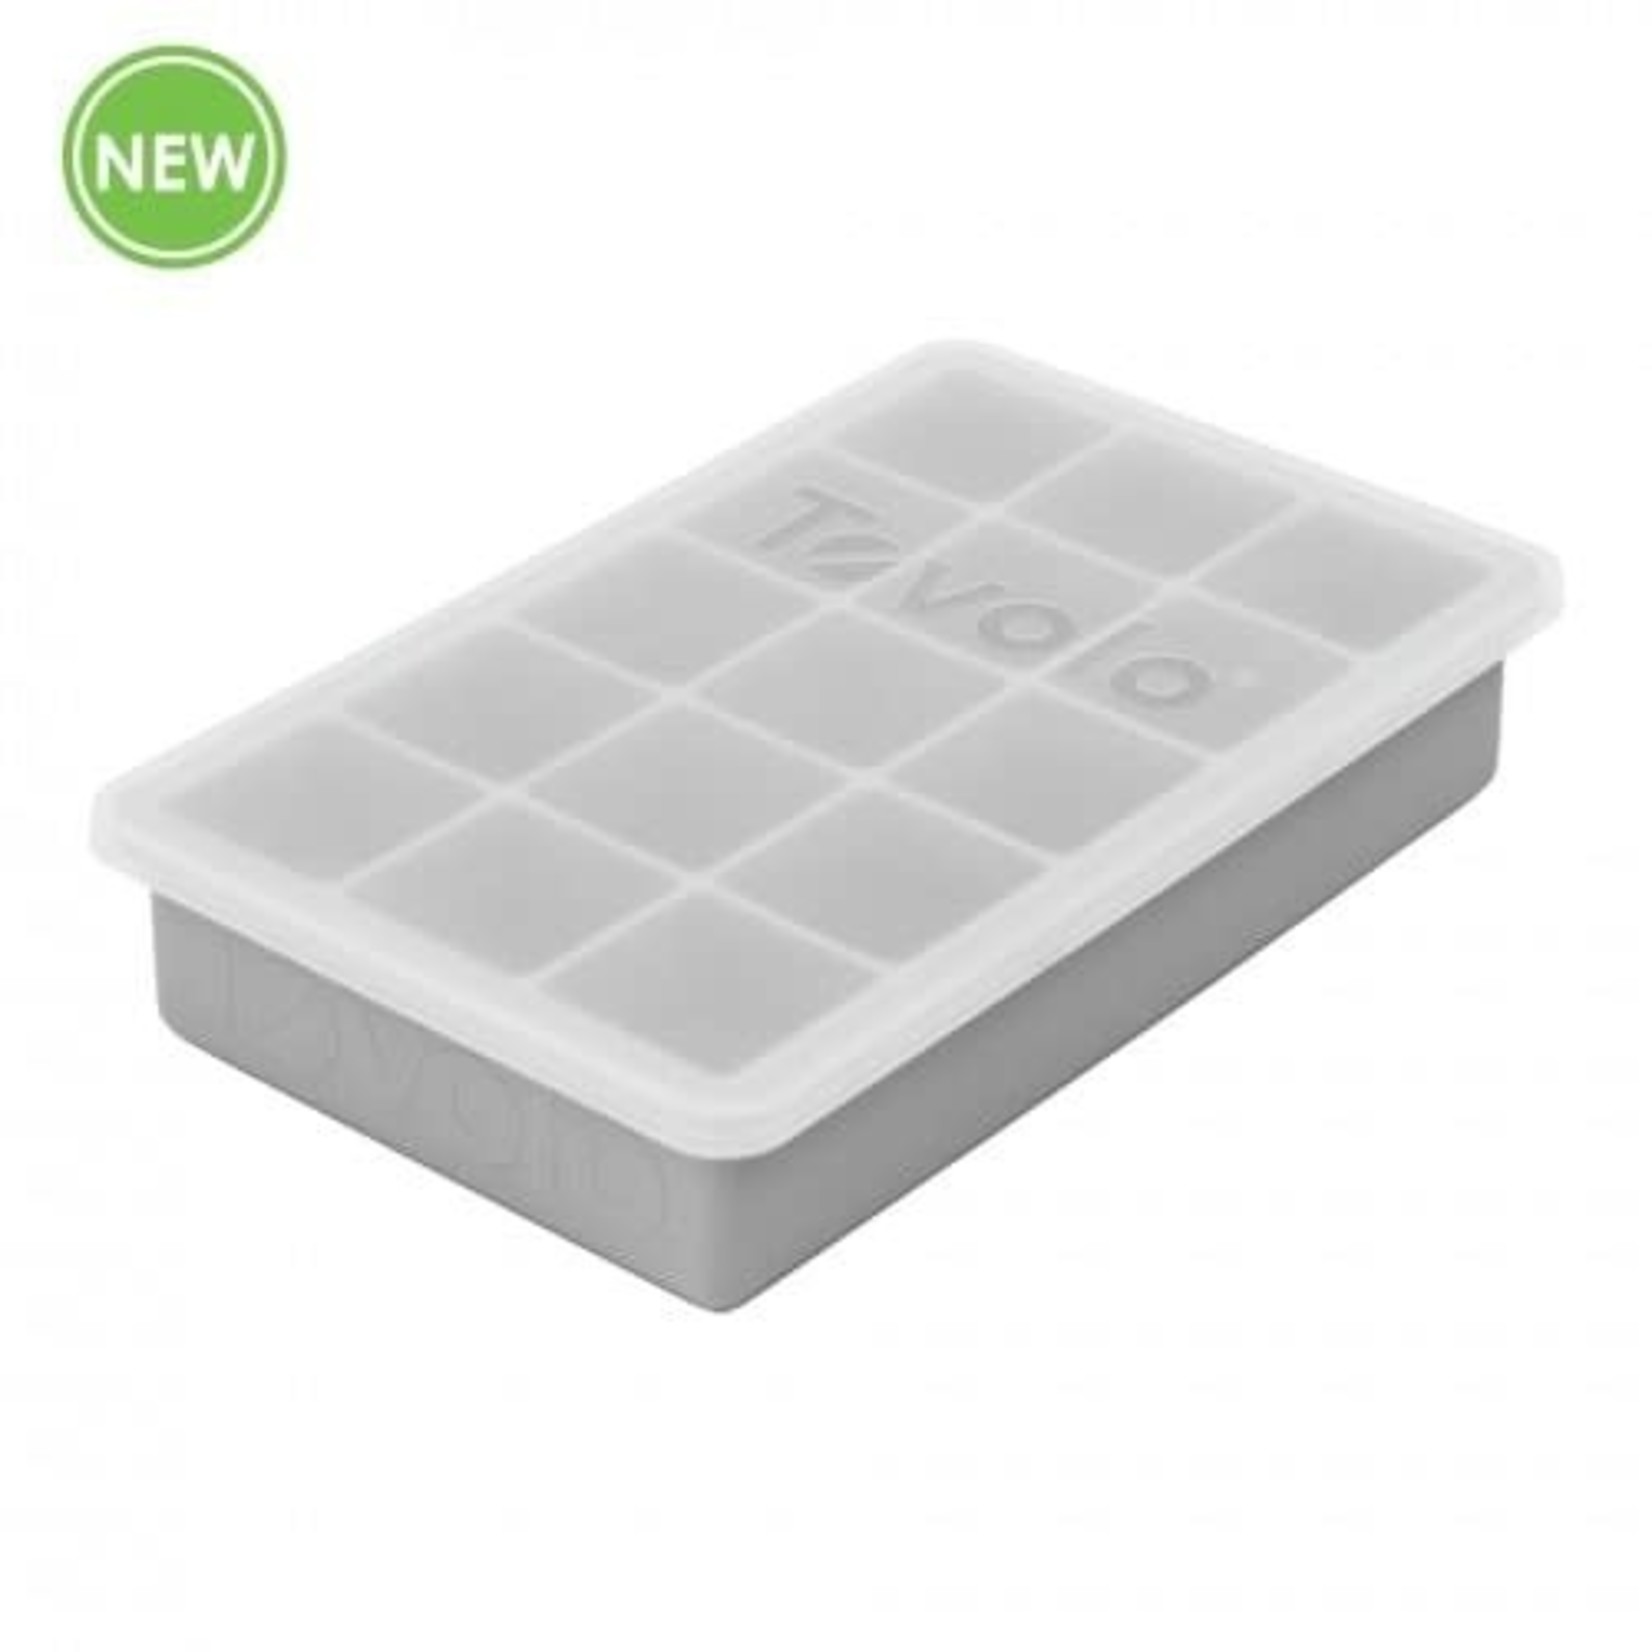 TOVOLO TOVOLO King Ice Cube Tray with Lid - Oyster Grey